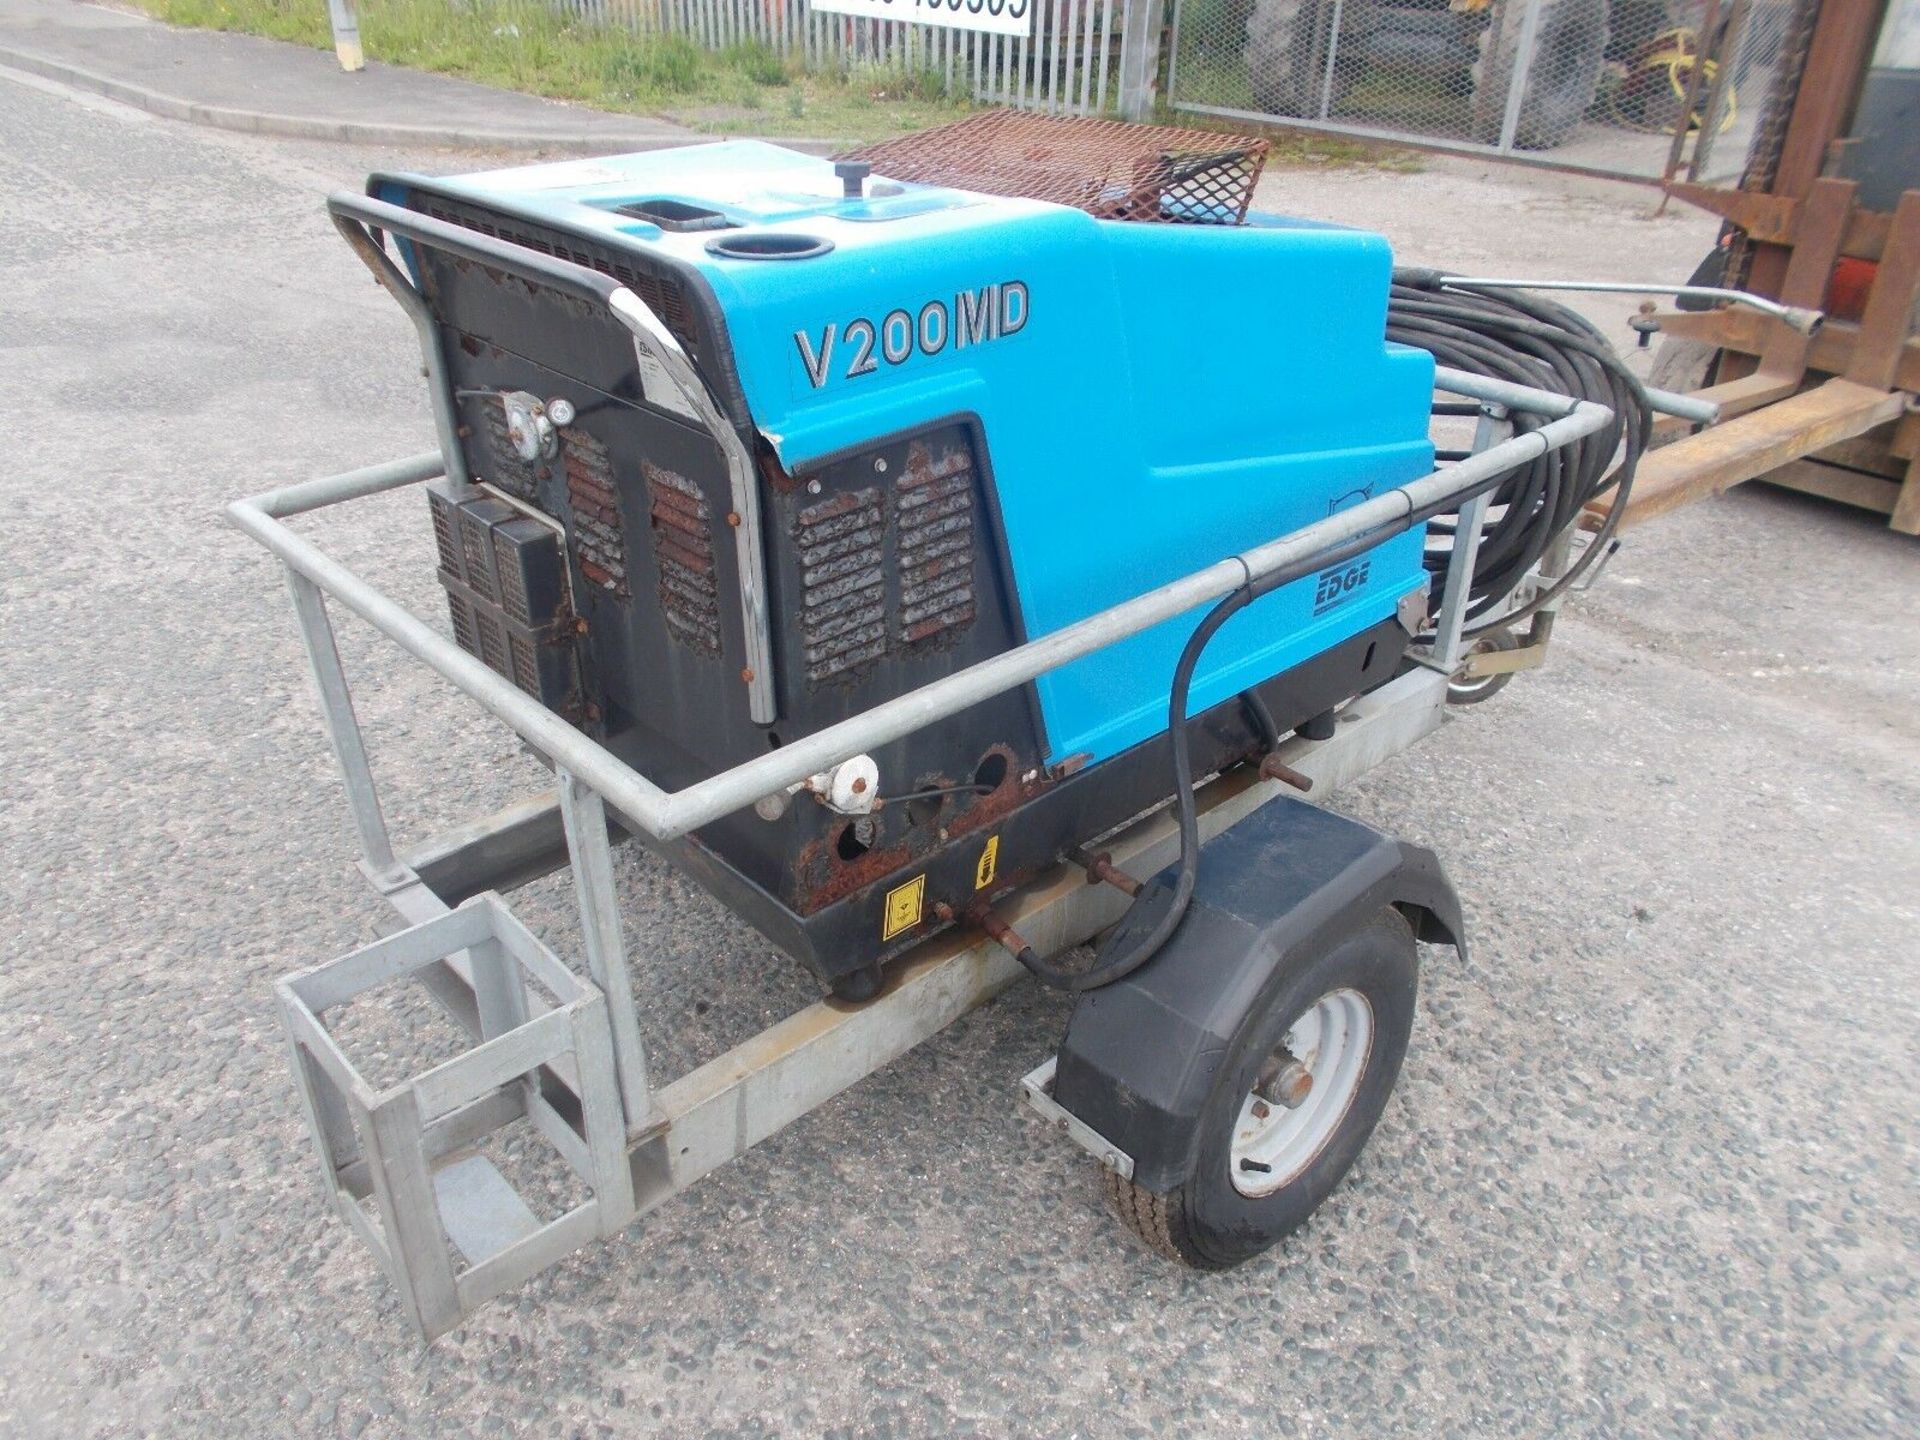 Edge V 200 MD Towable Hot & Cold Diesel Engined Pressure Washer - Image 7 of 7